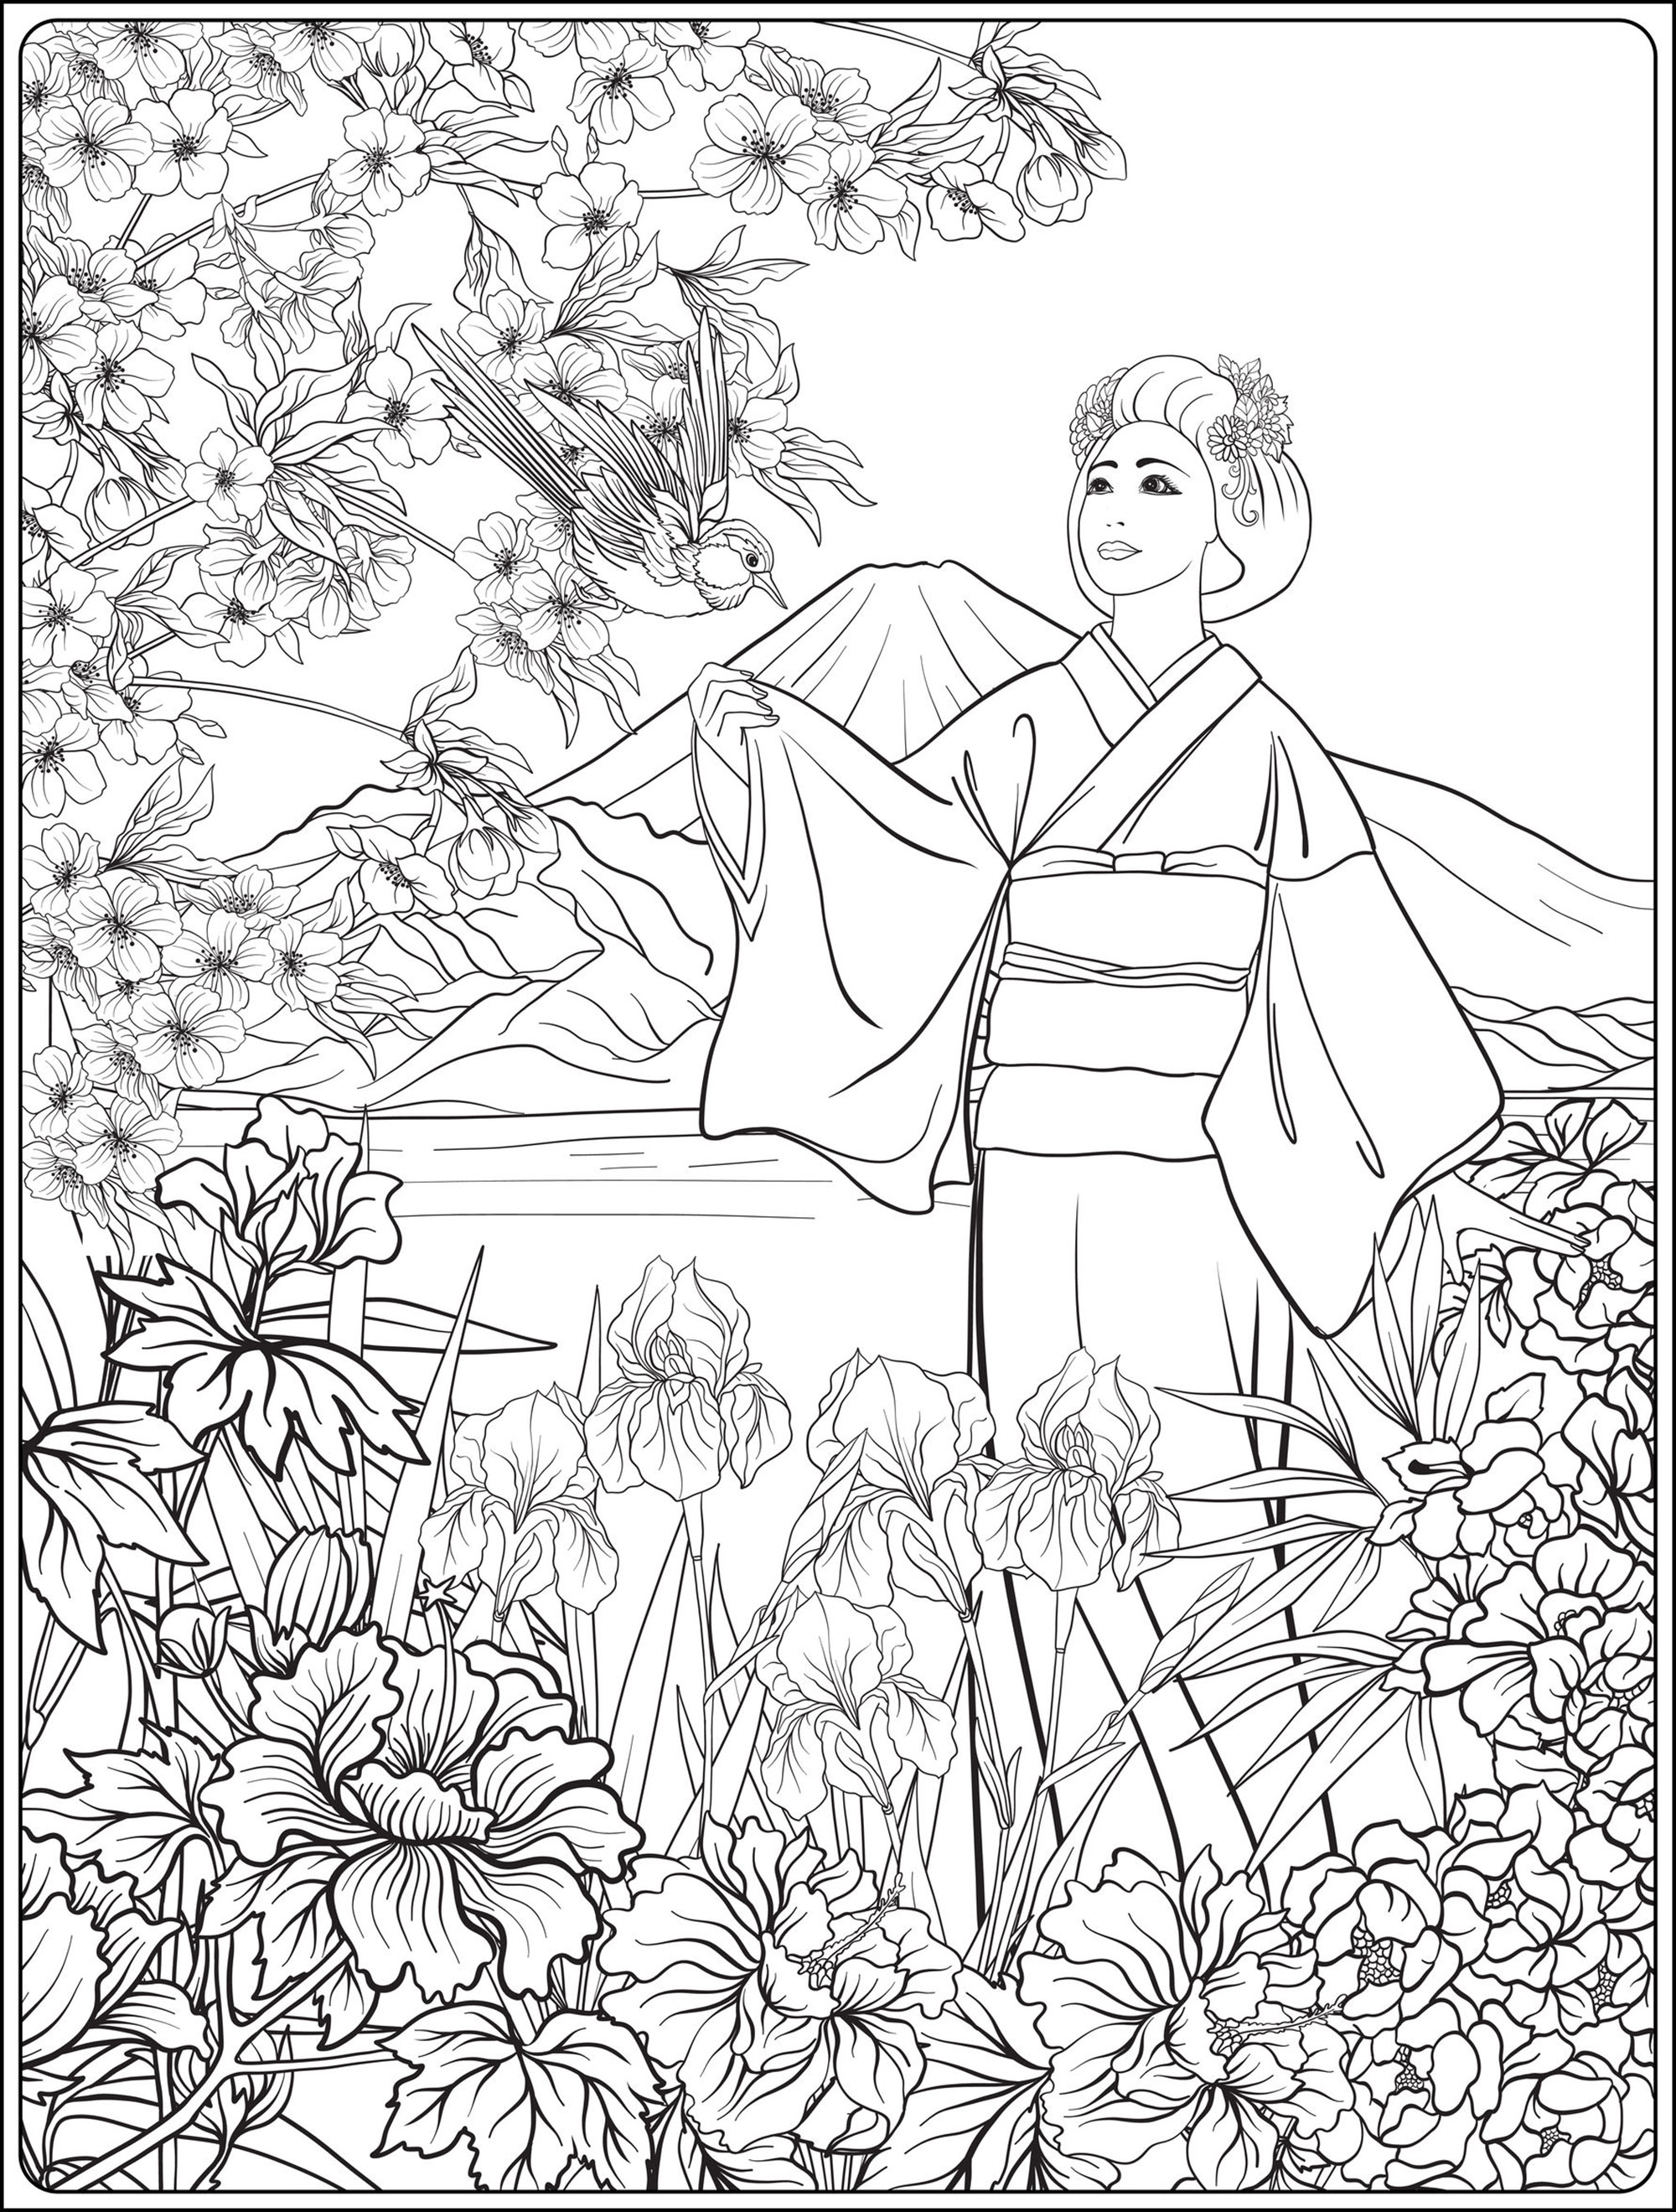 Download Japanese Landscape with Japanese woman in kimono - Japan Adult Coloring Pages